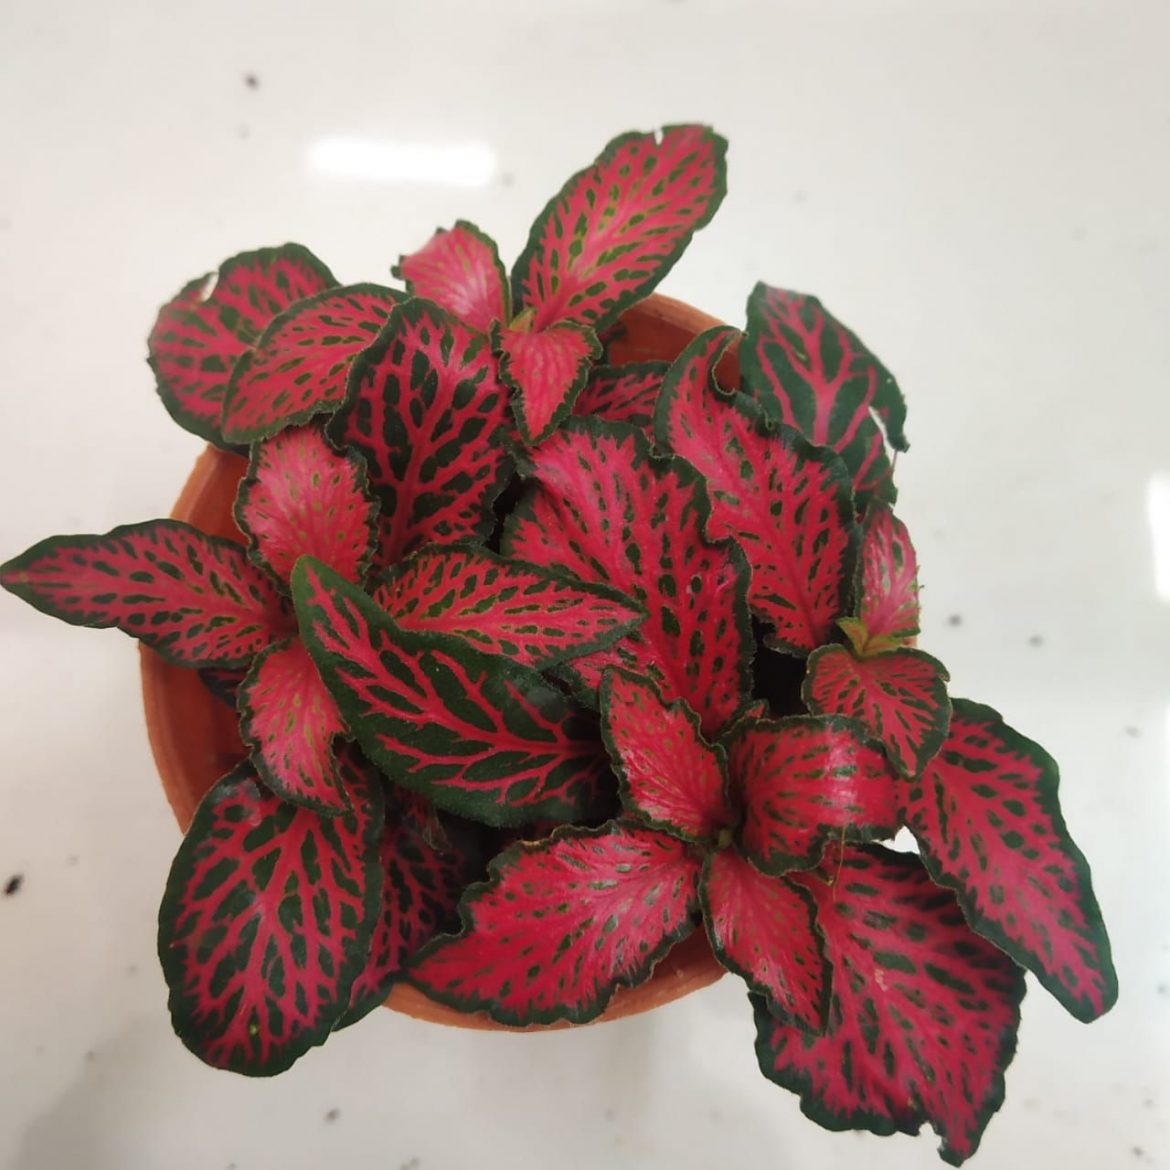 How To Grow and Care for Fittonia - NurseryBuy